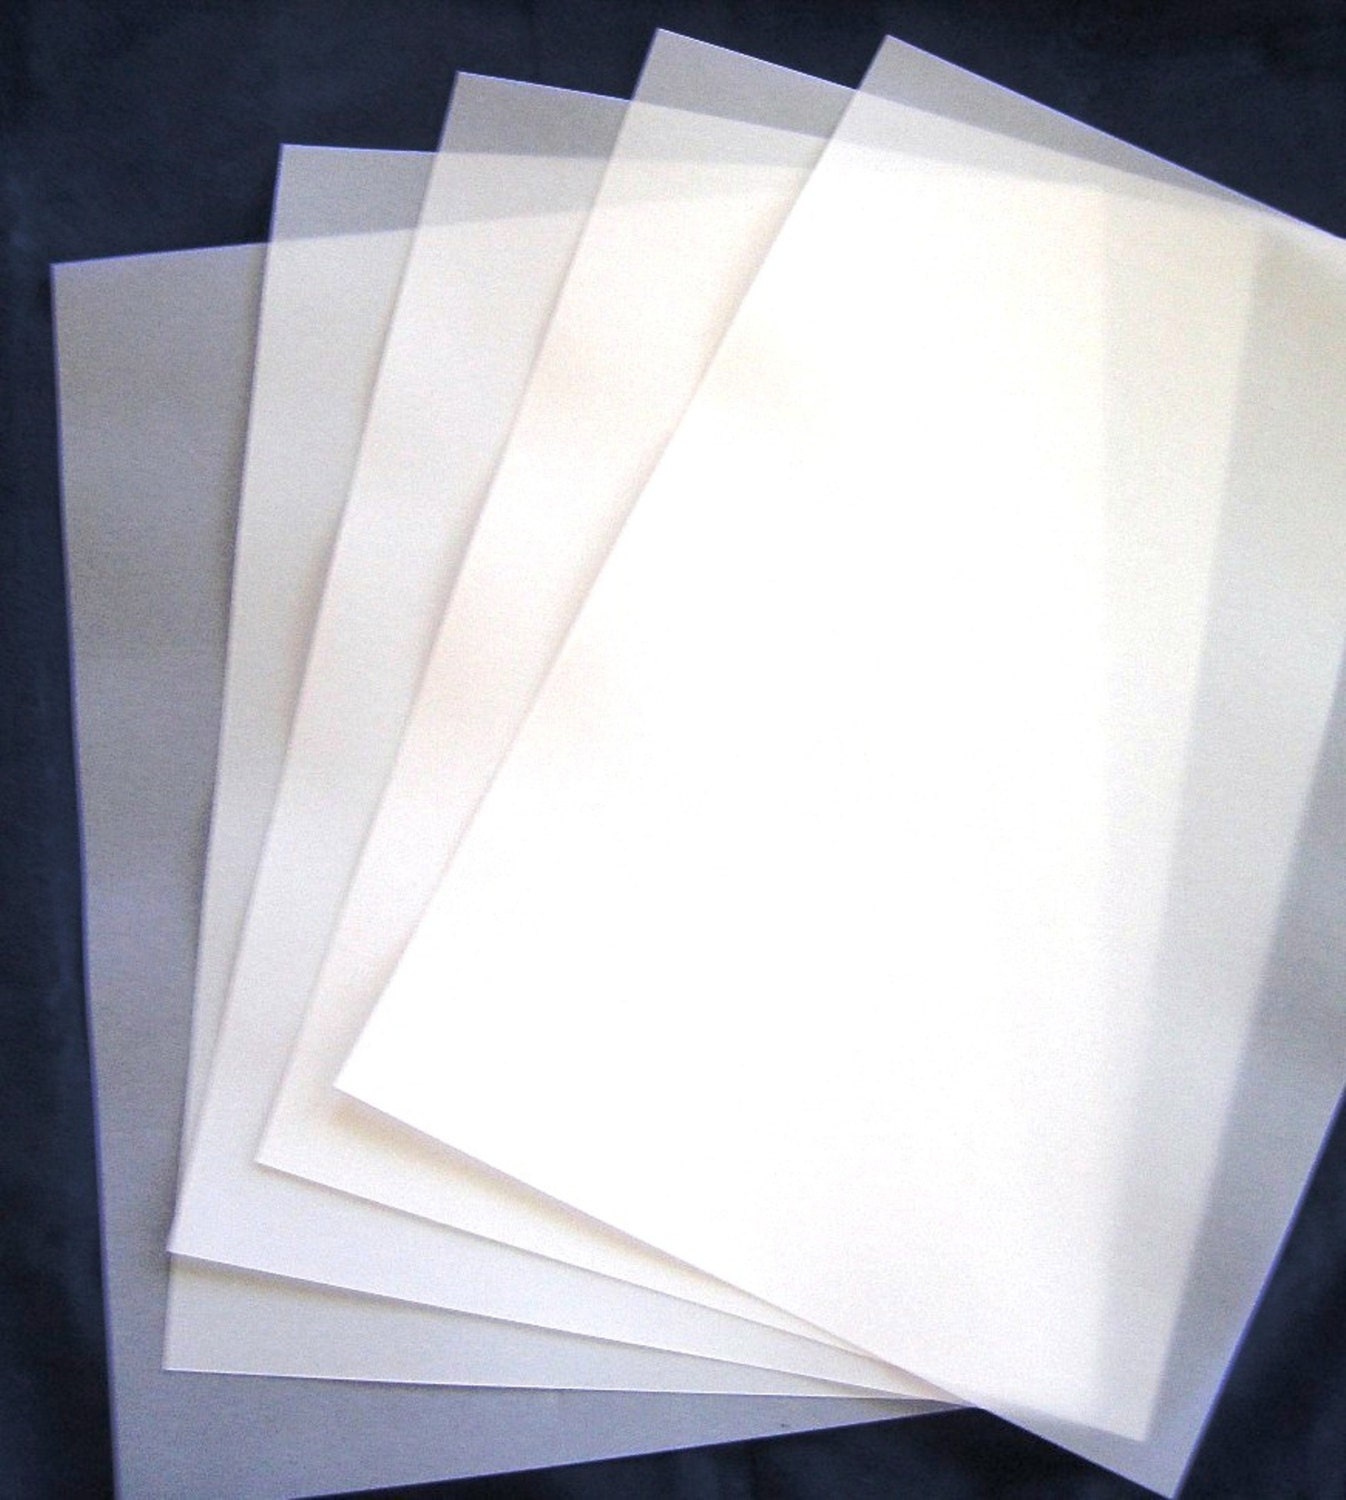 Vellum Paper Pack, Patterned Vellum Paper, Translucent Paper for  Journaling, Crafting, Craft Paper Pack 